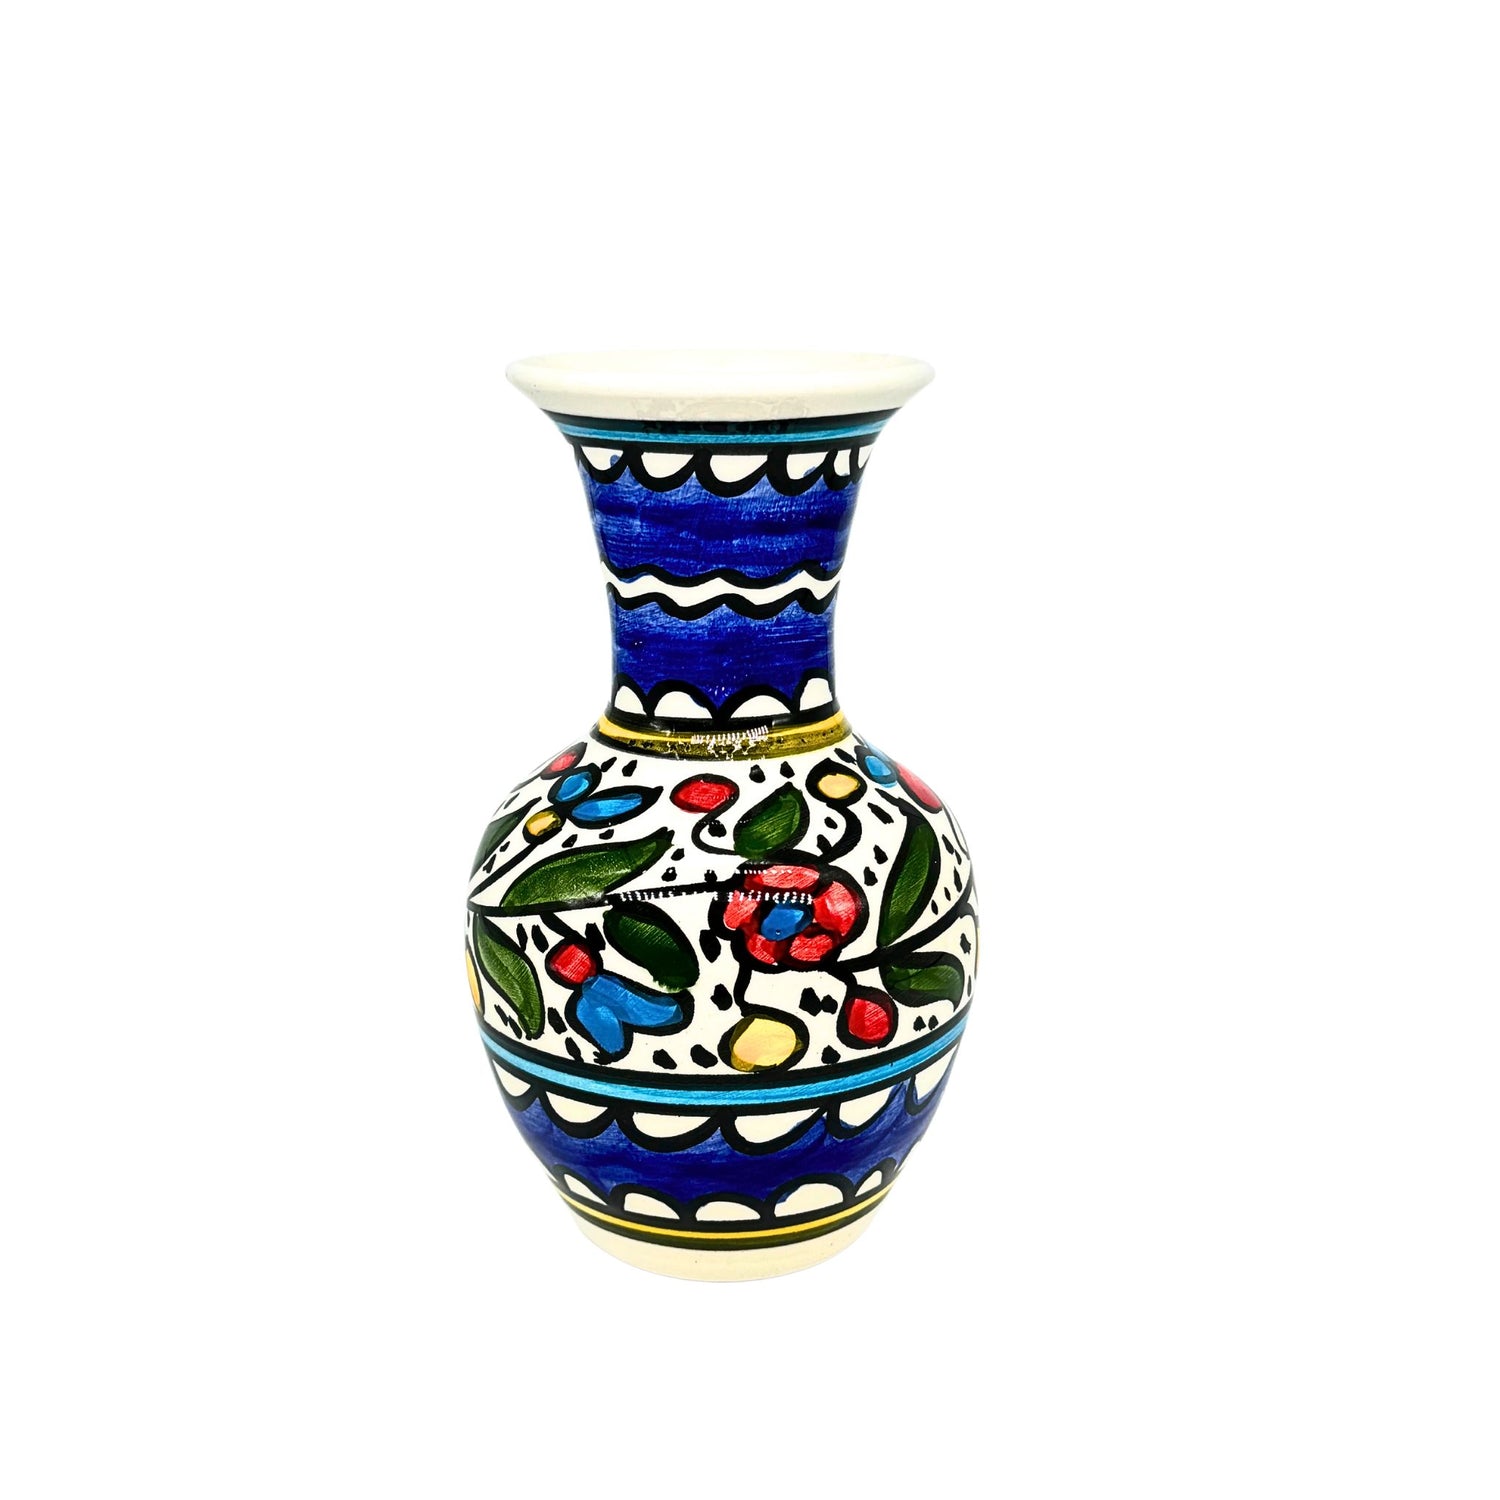 Ceramic Vases, Flowerpots, and Other Decorative Items